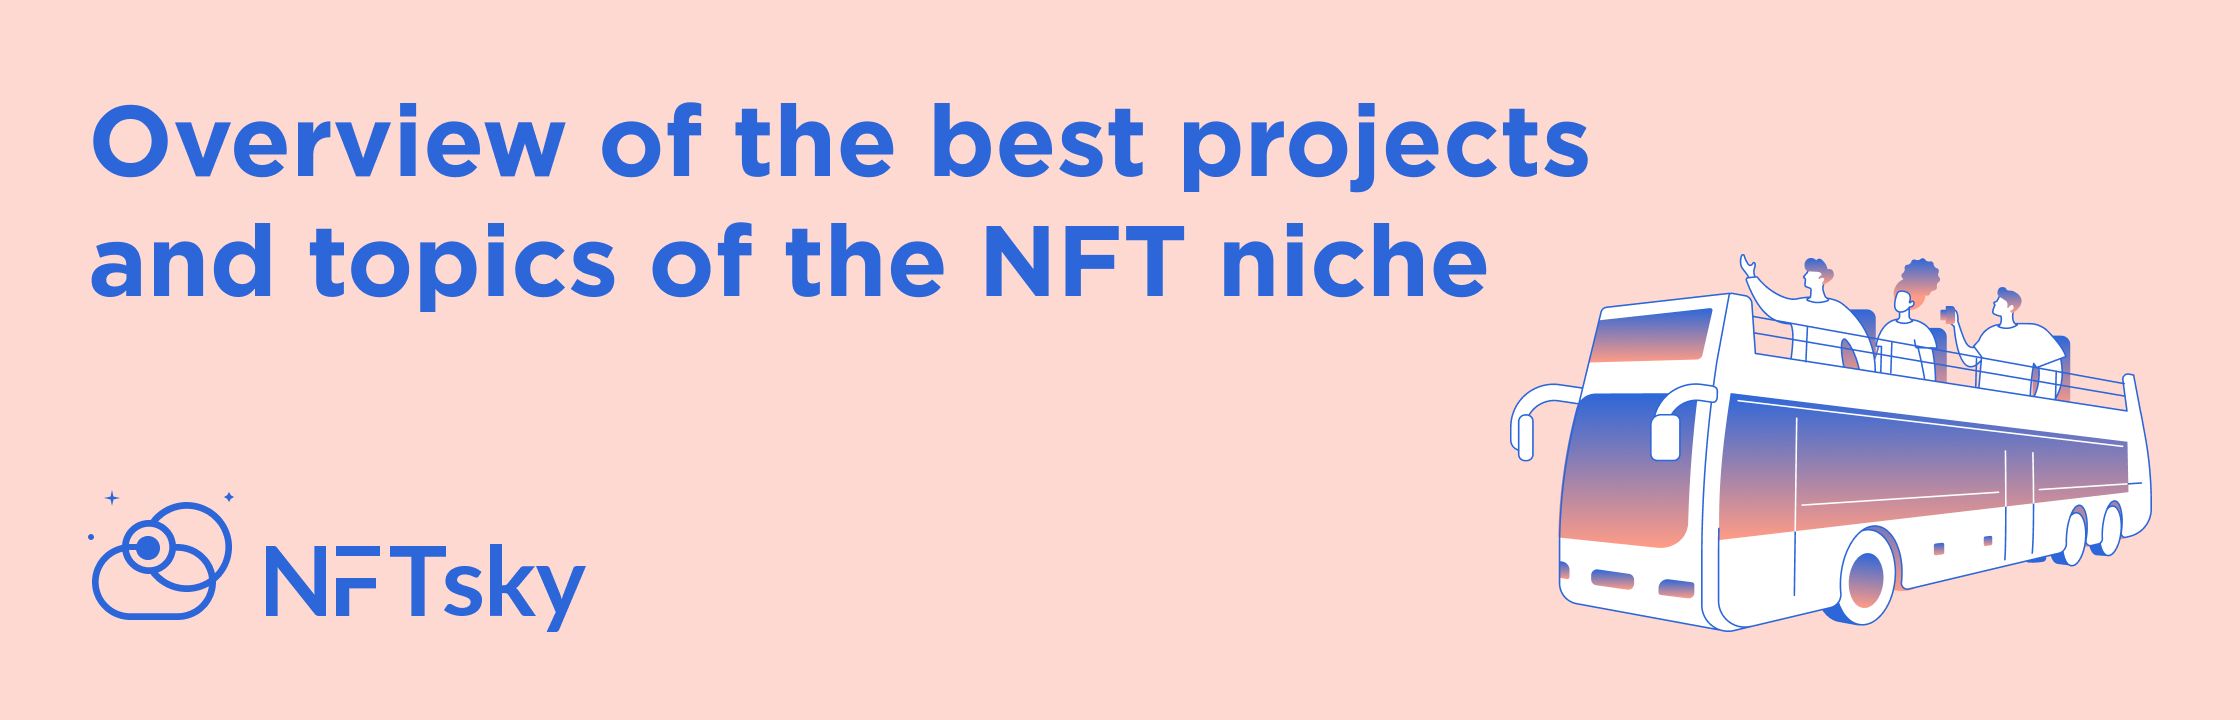 Overview of the best projects and topics of the NFT nicheon NFTsky